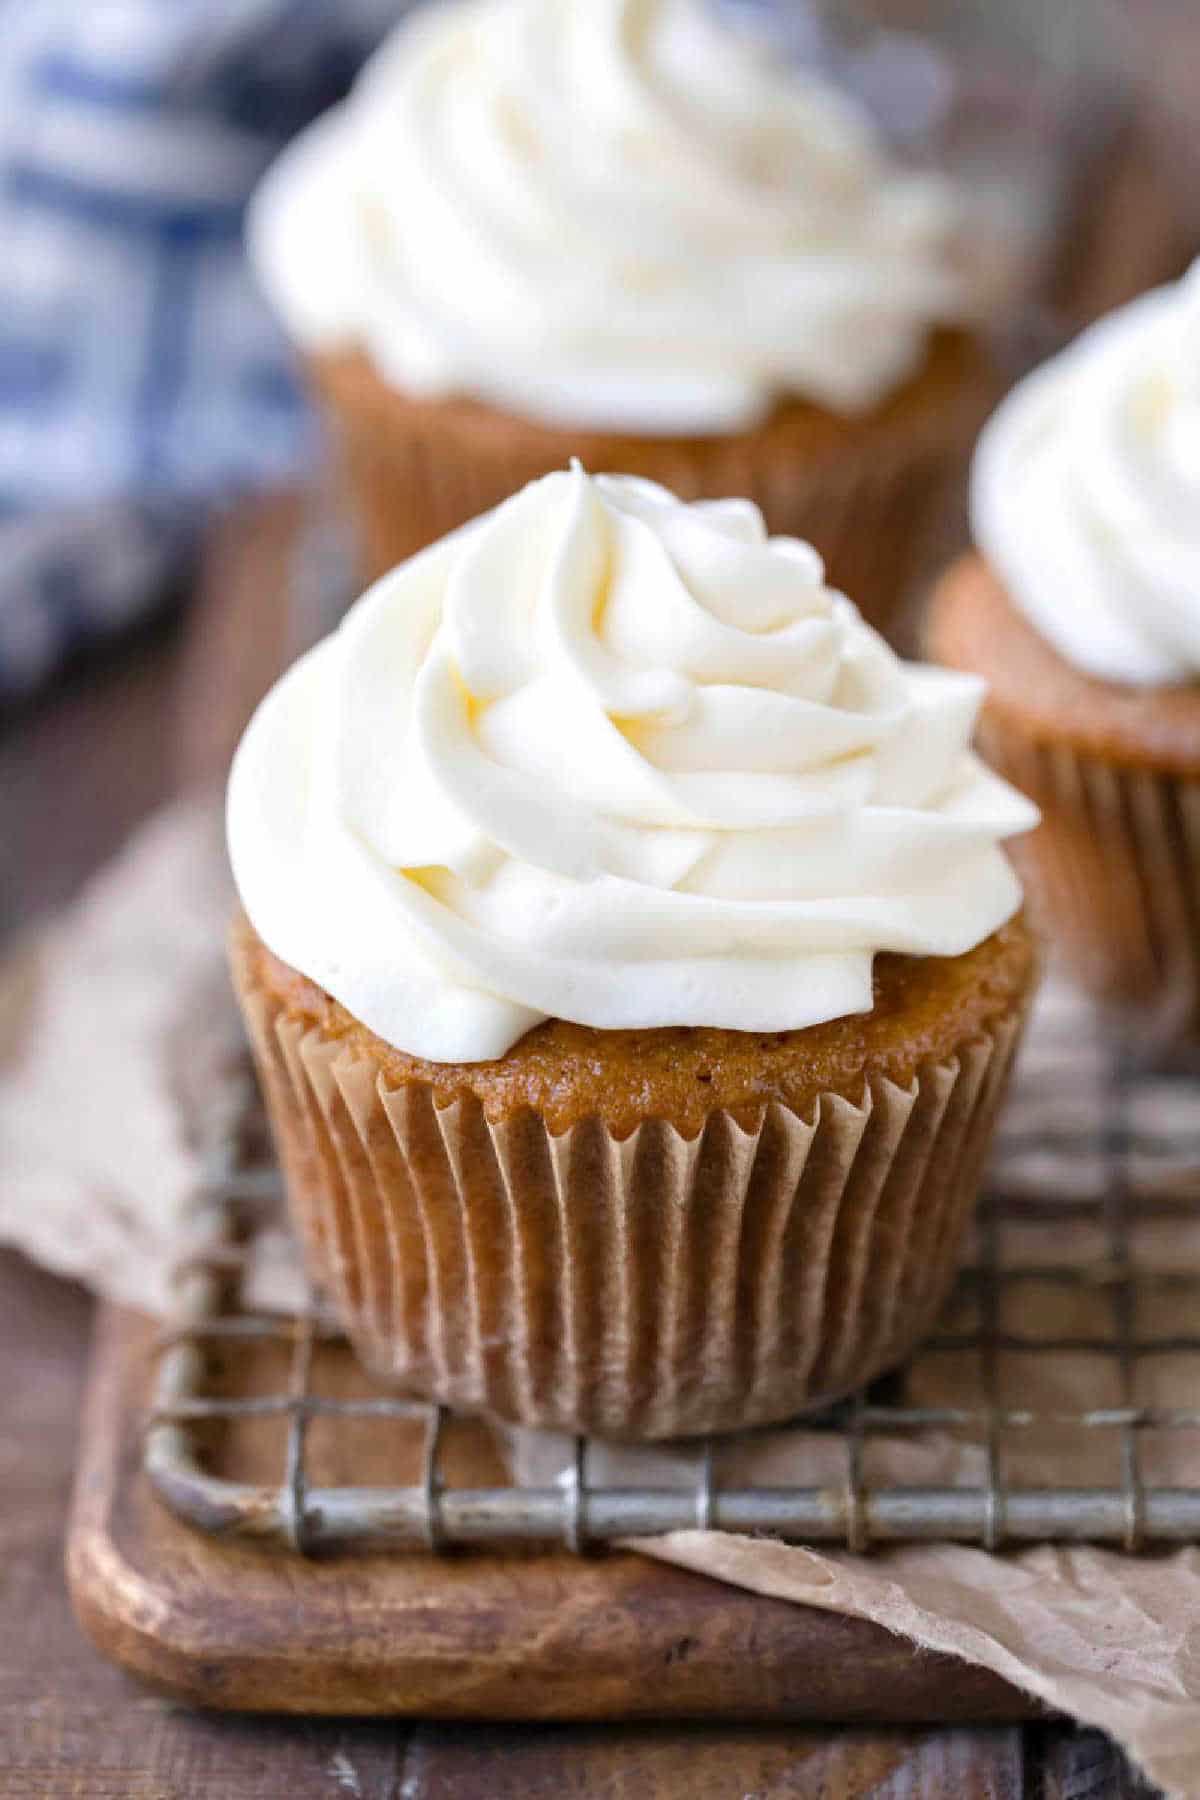 Cream cheese frosting on an apple spice cupcake.